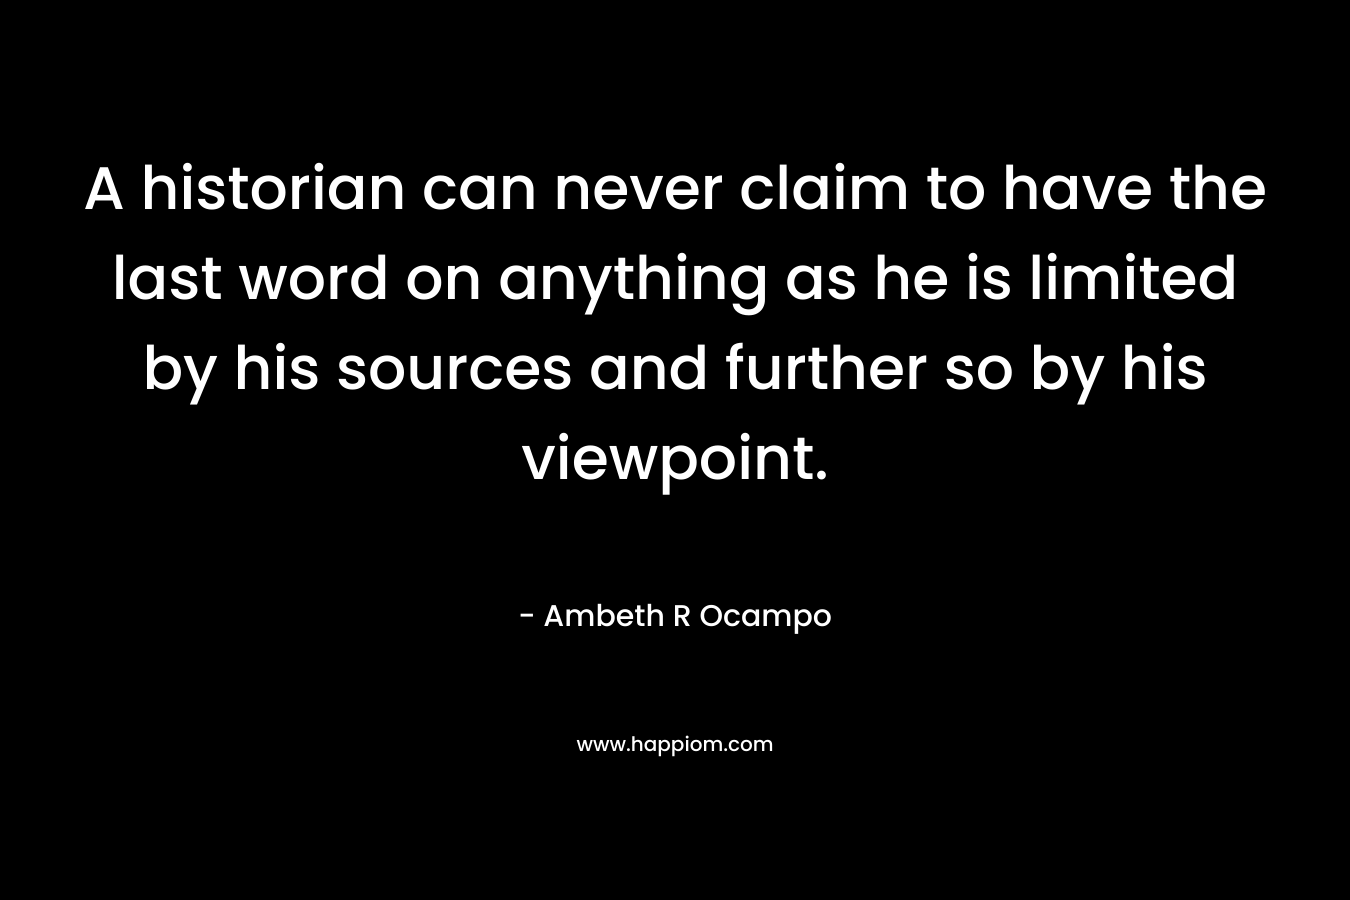 A historian can never claim to have the last word on anything as he is limited by his sources and further so by his viewpoint. – Ambeth R Ocampo